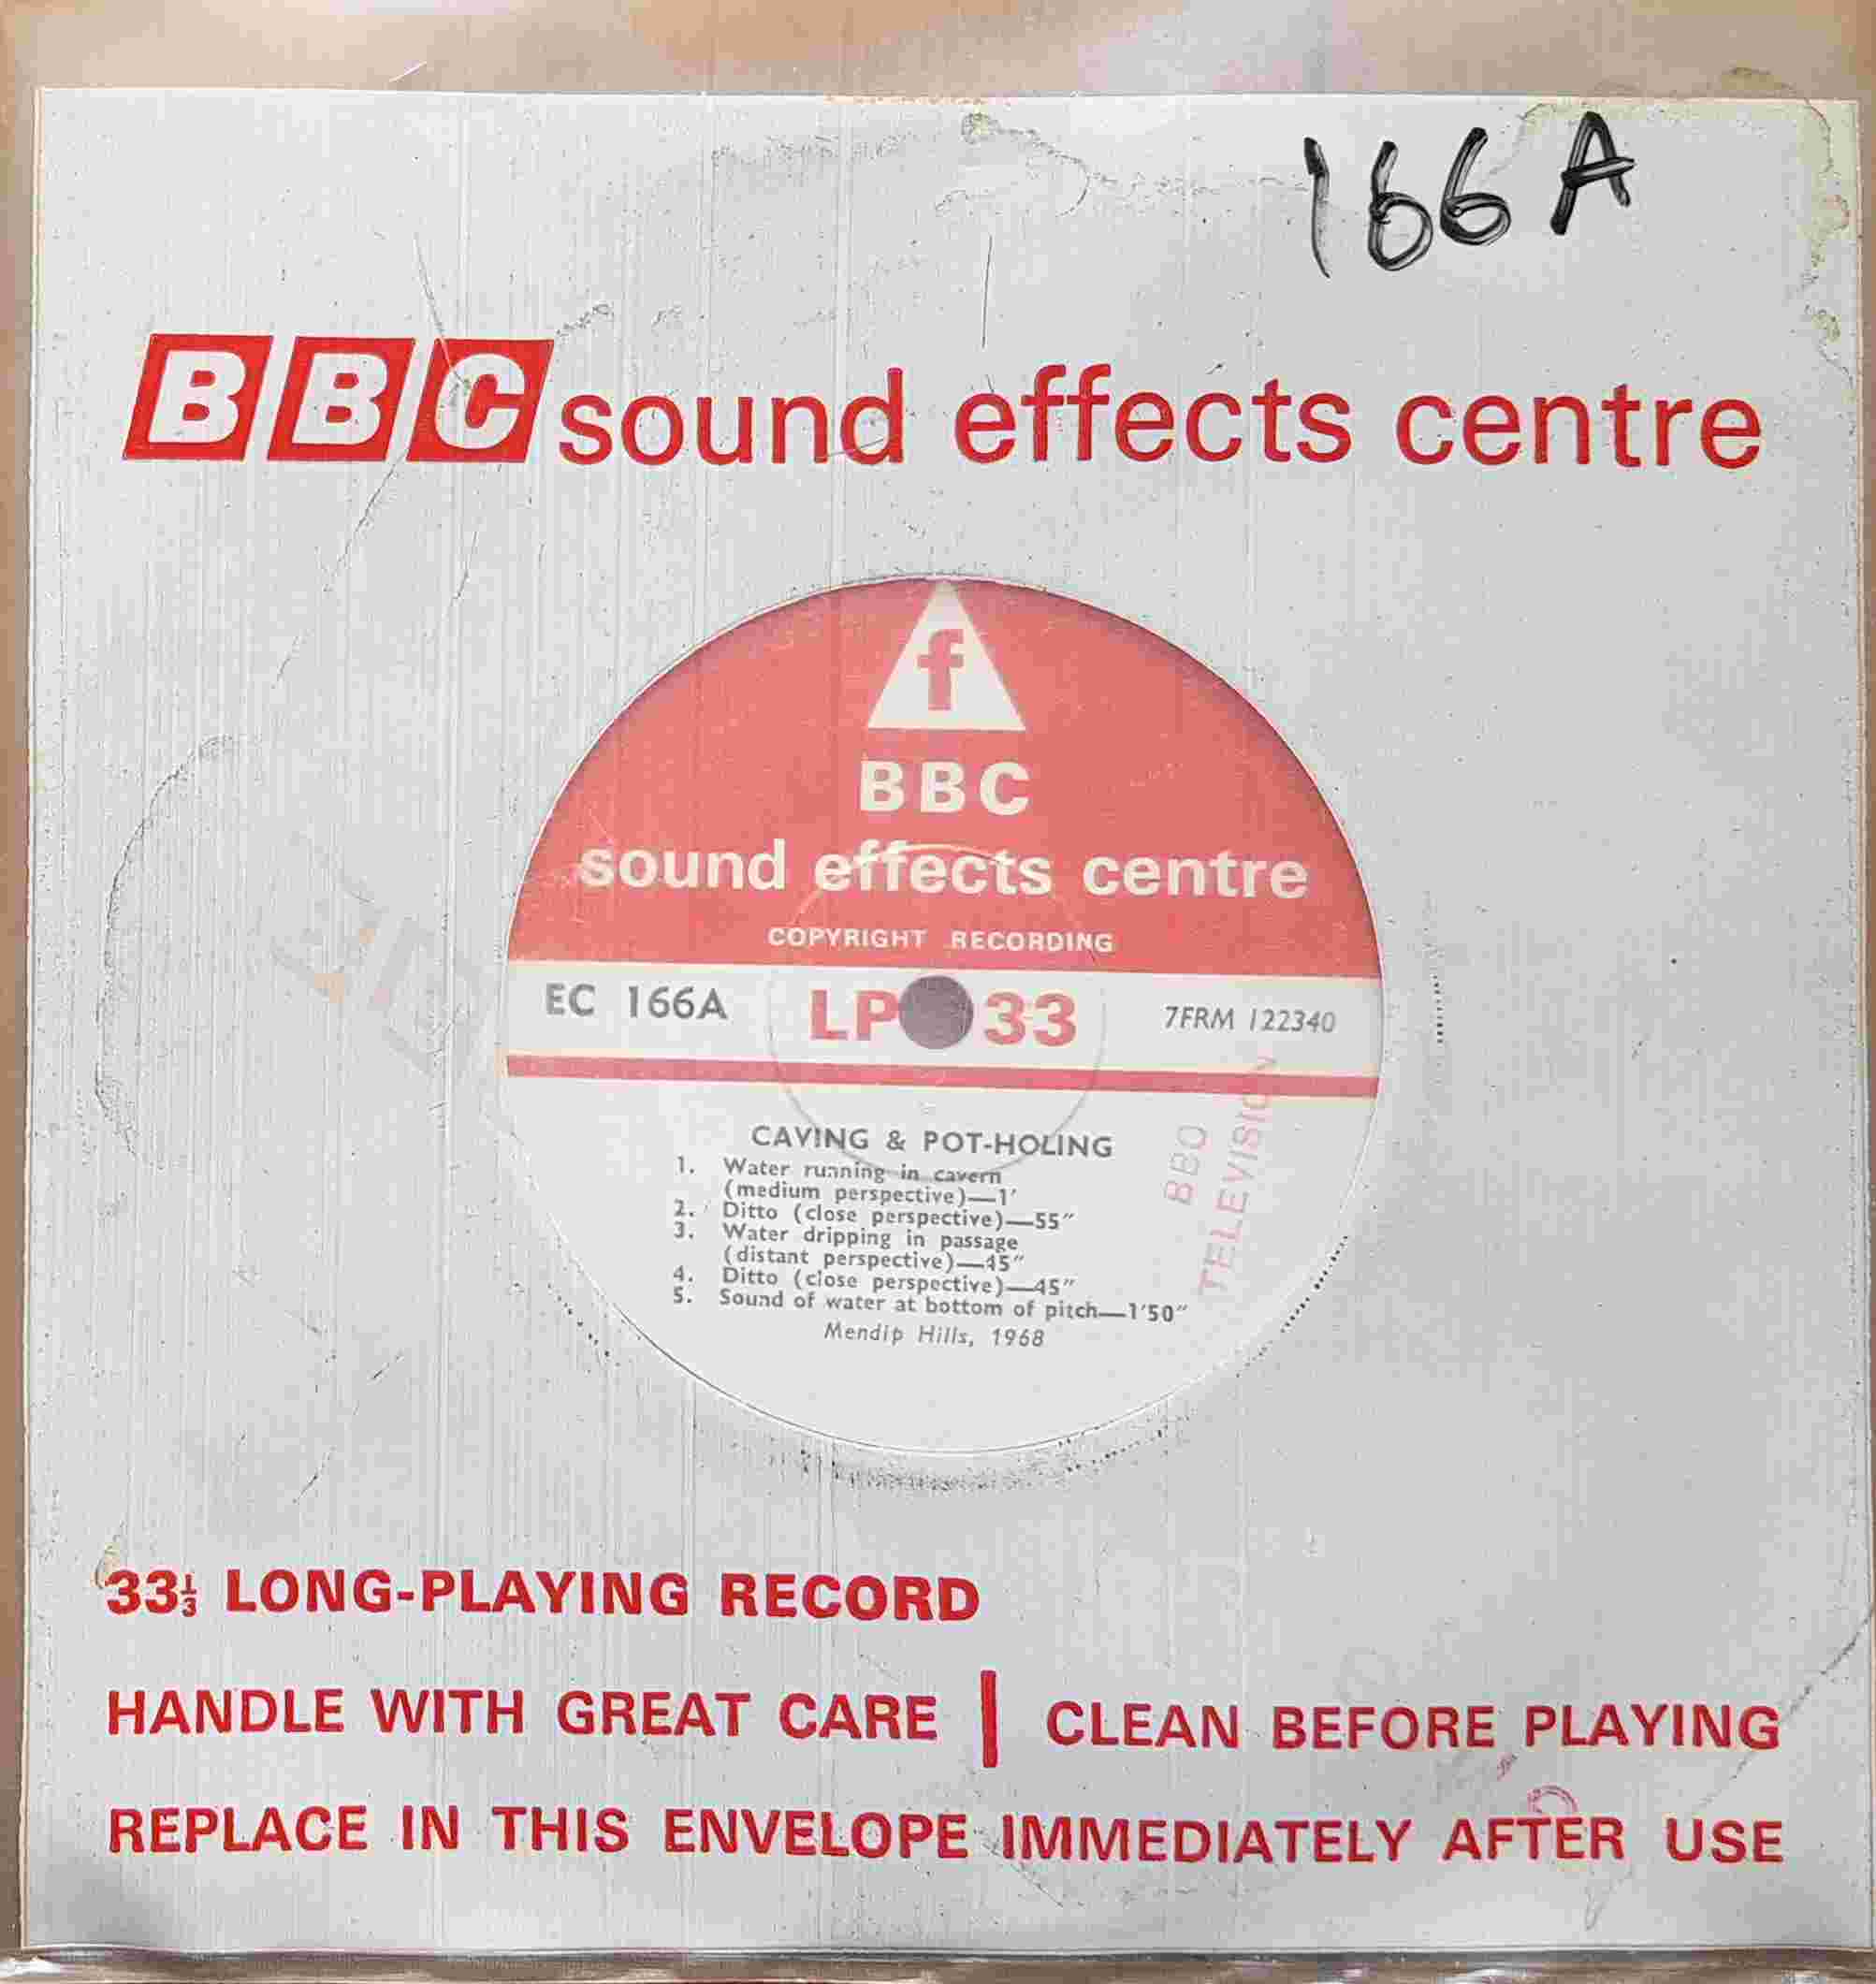 Picture of EC 166A Caving & pot-holing by artist Not registered from the BBC singles - Records and Tapes library